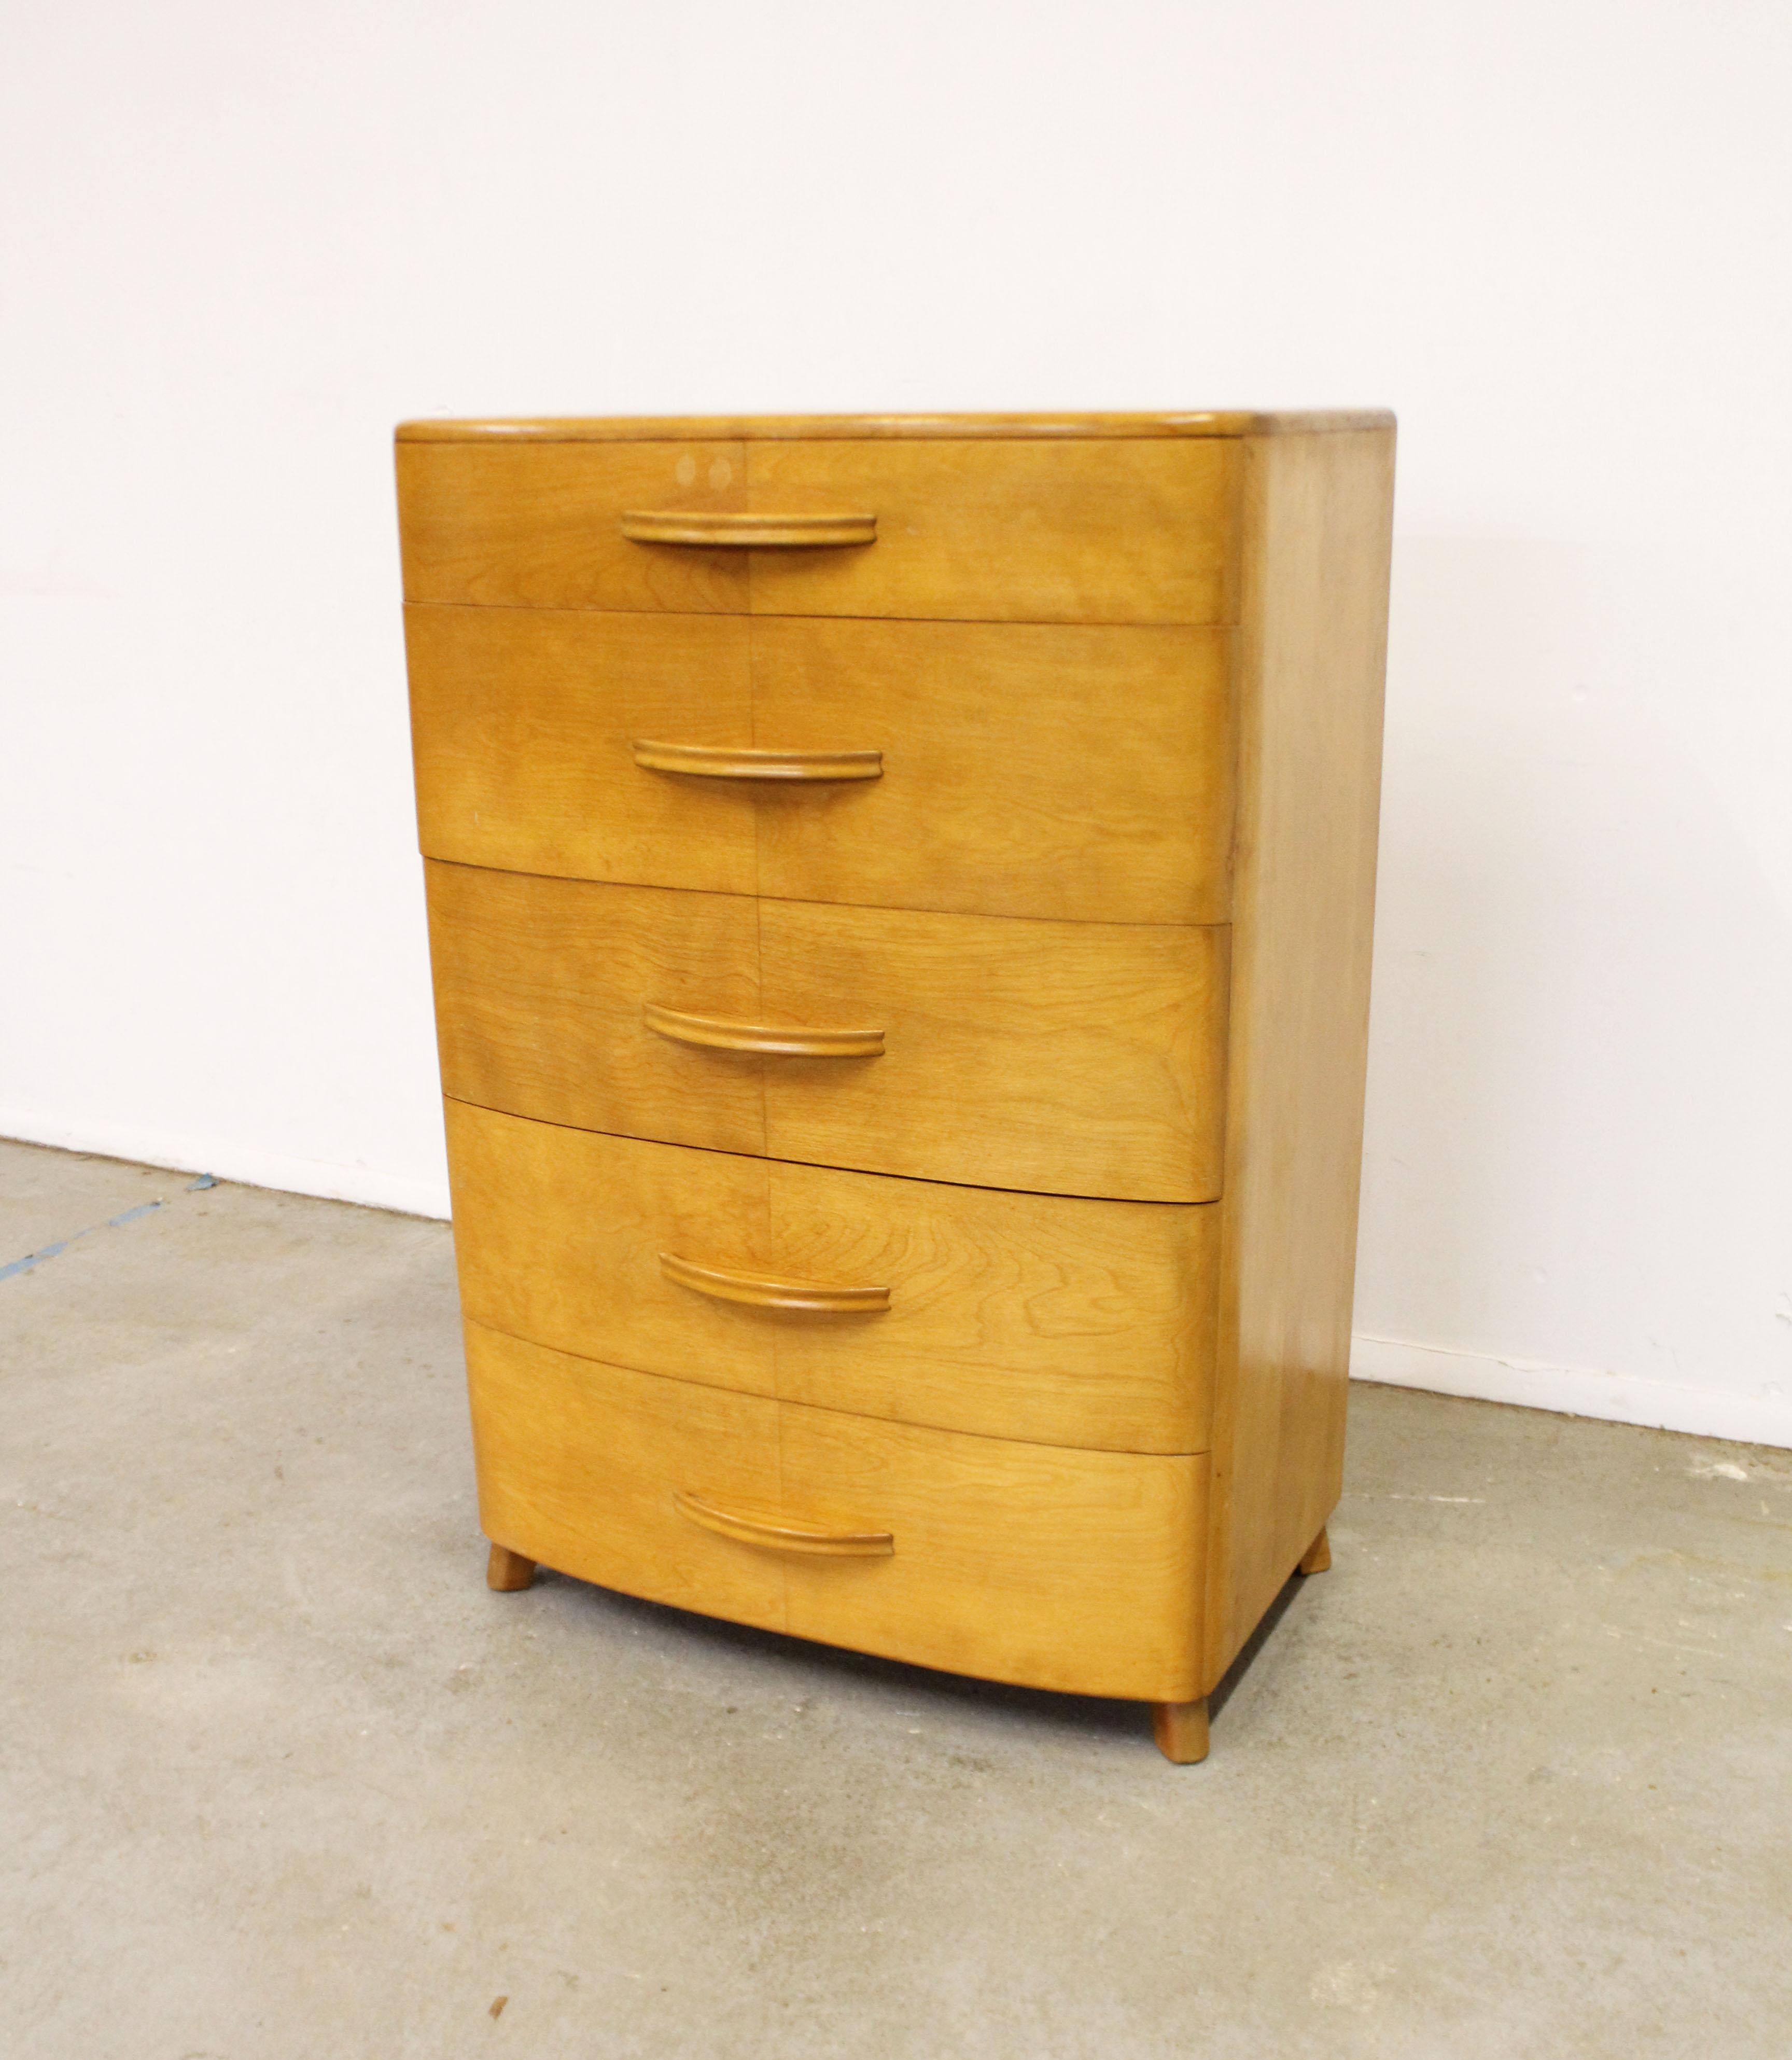 What a find. Offered is a vintage tall chest/dresser designed by Alexis de Sakhnoffsky for Heywood Wakefield's 'Crescendo' line. It is made of birch and features a Streamlined Modern look. The piece is in decent condition considering its age (circa